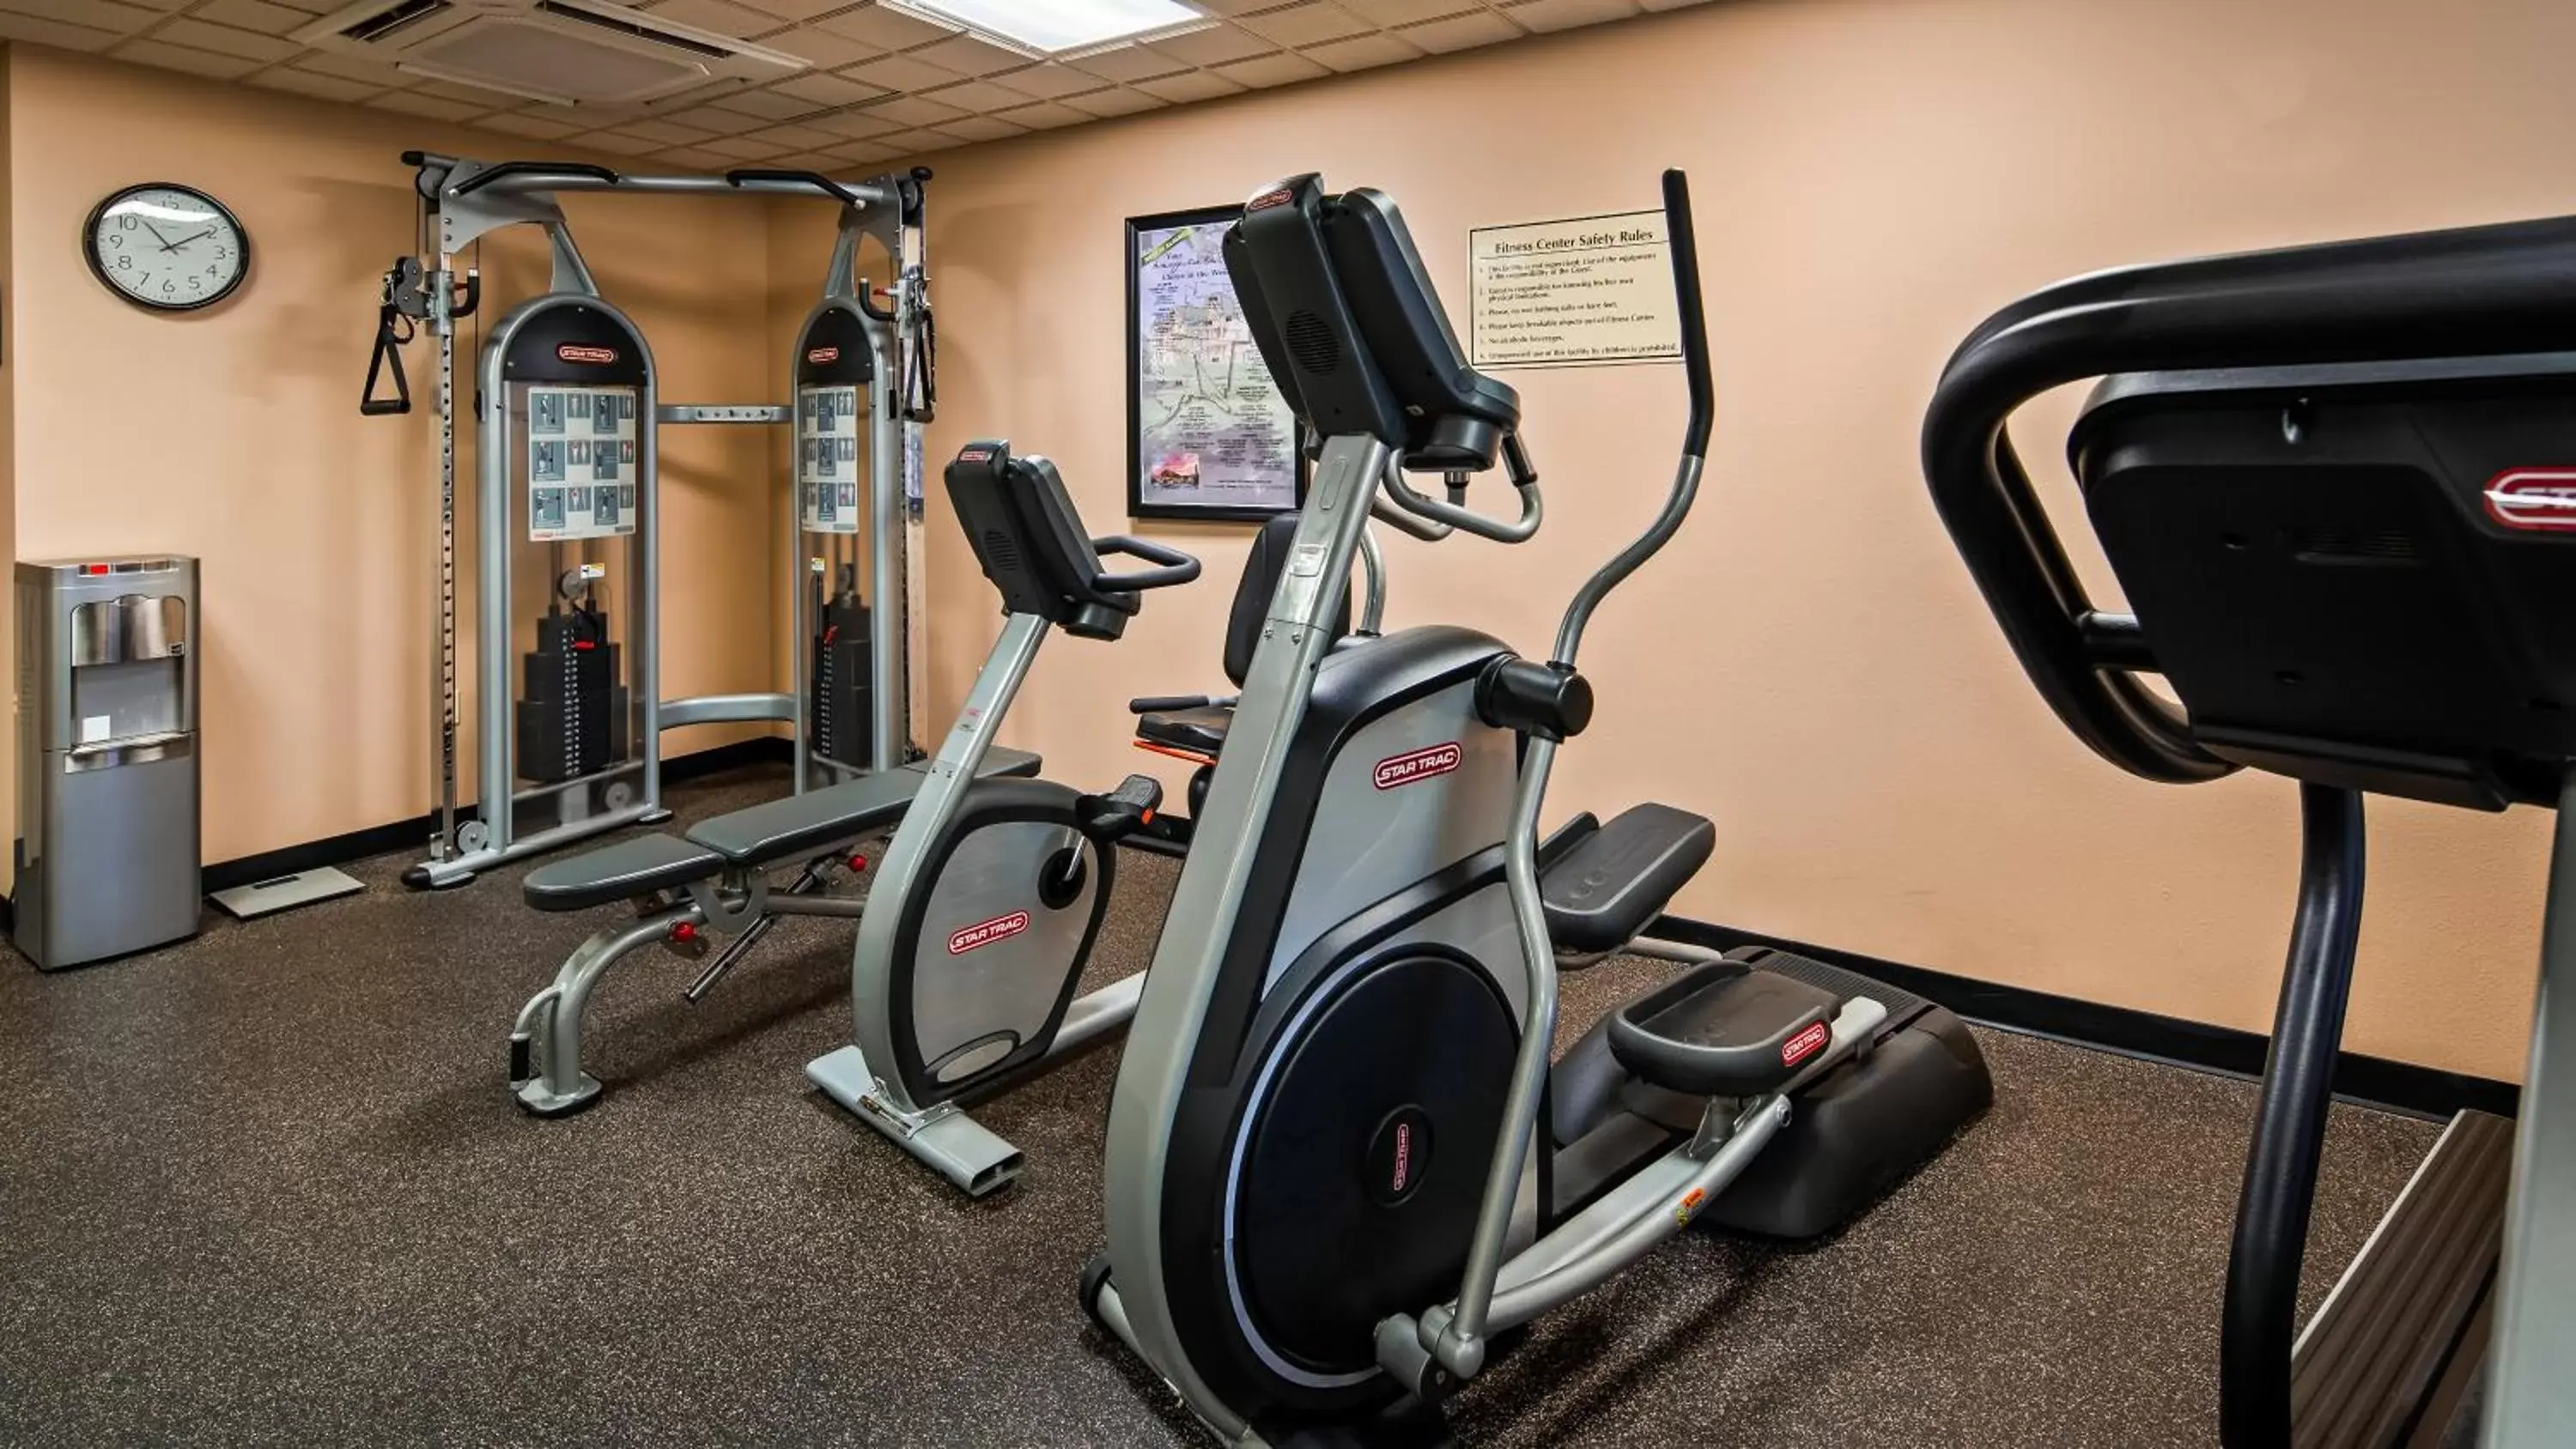 Fitness centre/facilities, Fitness Center/Facilities in Best Western Plus Chena River Lodge